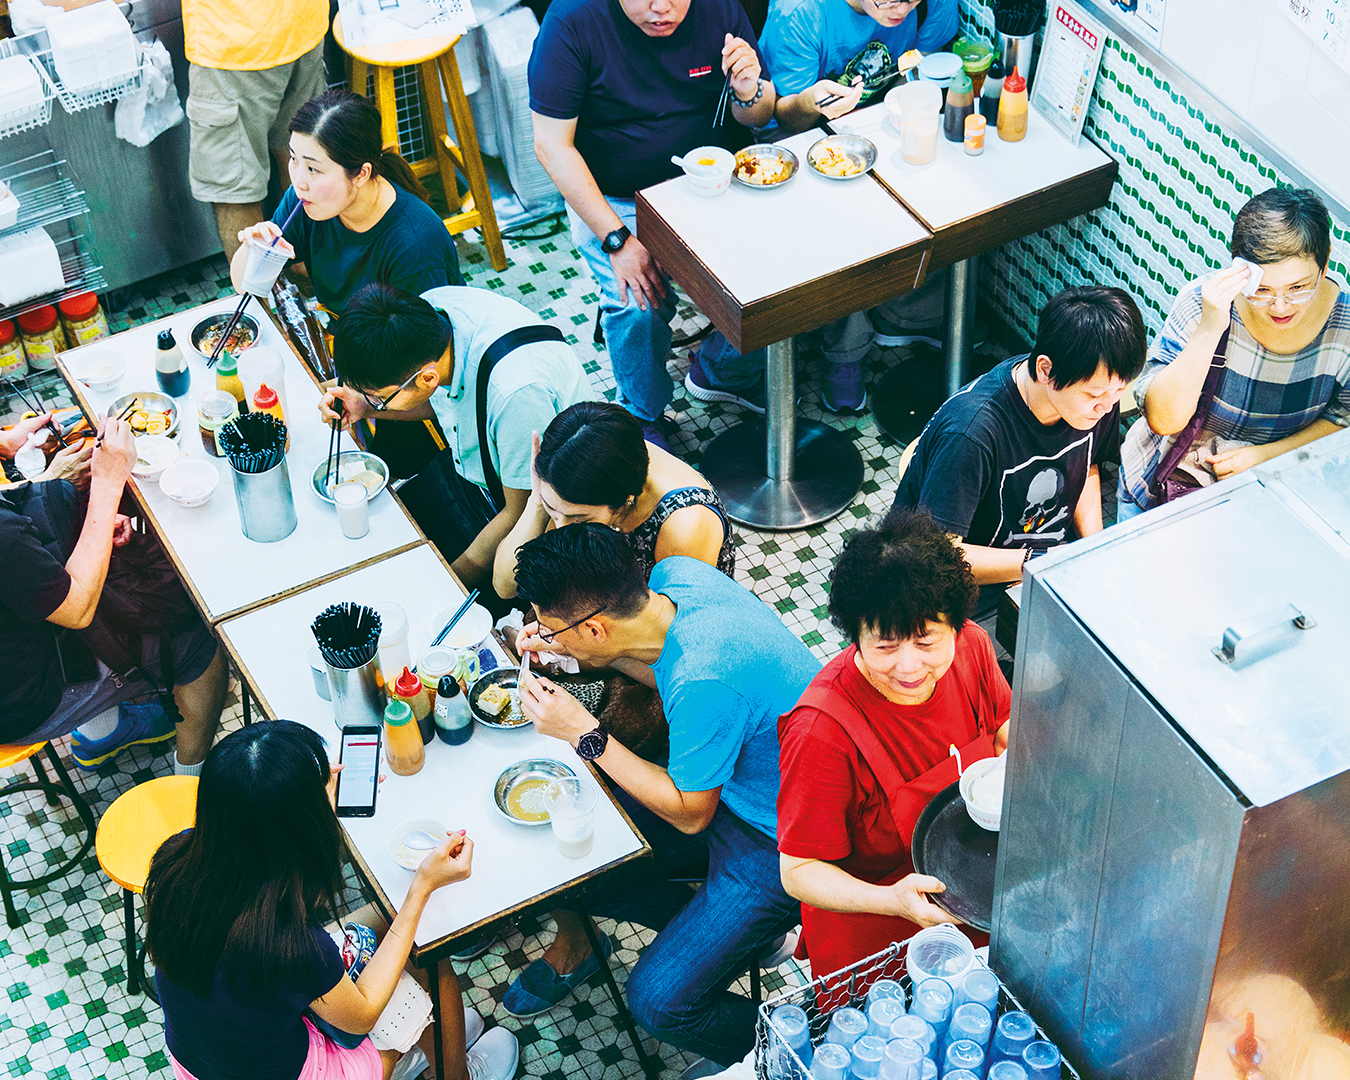 Bird's eye view of people eating in a restaurant in Hong Kong